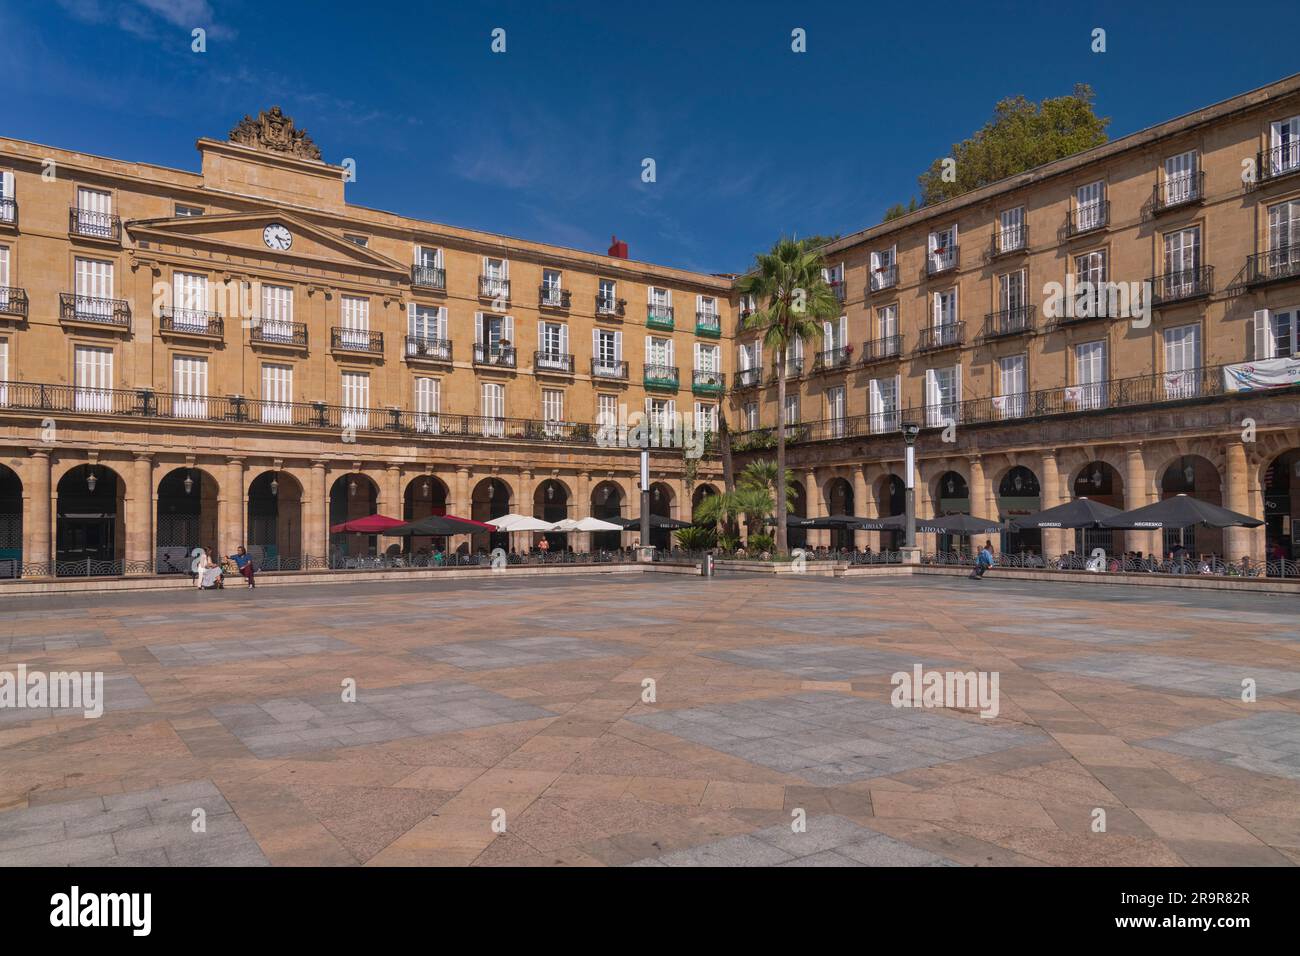 Spain, Basque Country, Bilbao, Plaza Nueva, Monumental square in the Neoclassical style dating from 1812. Stock Photo